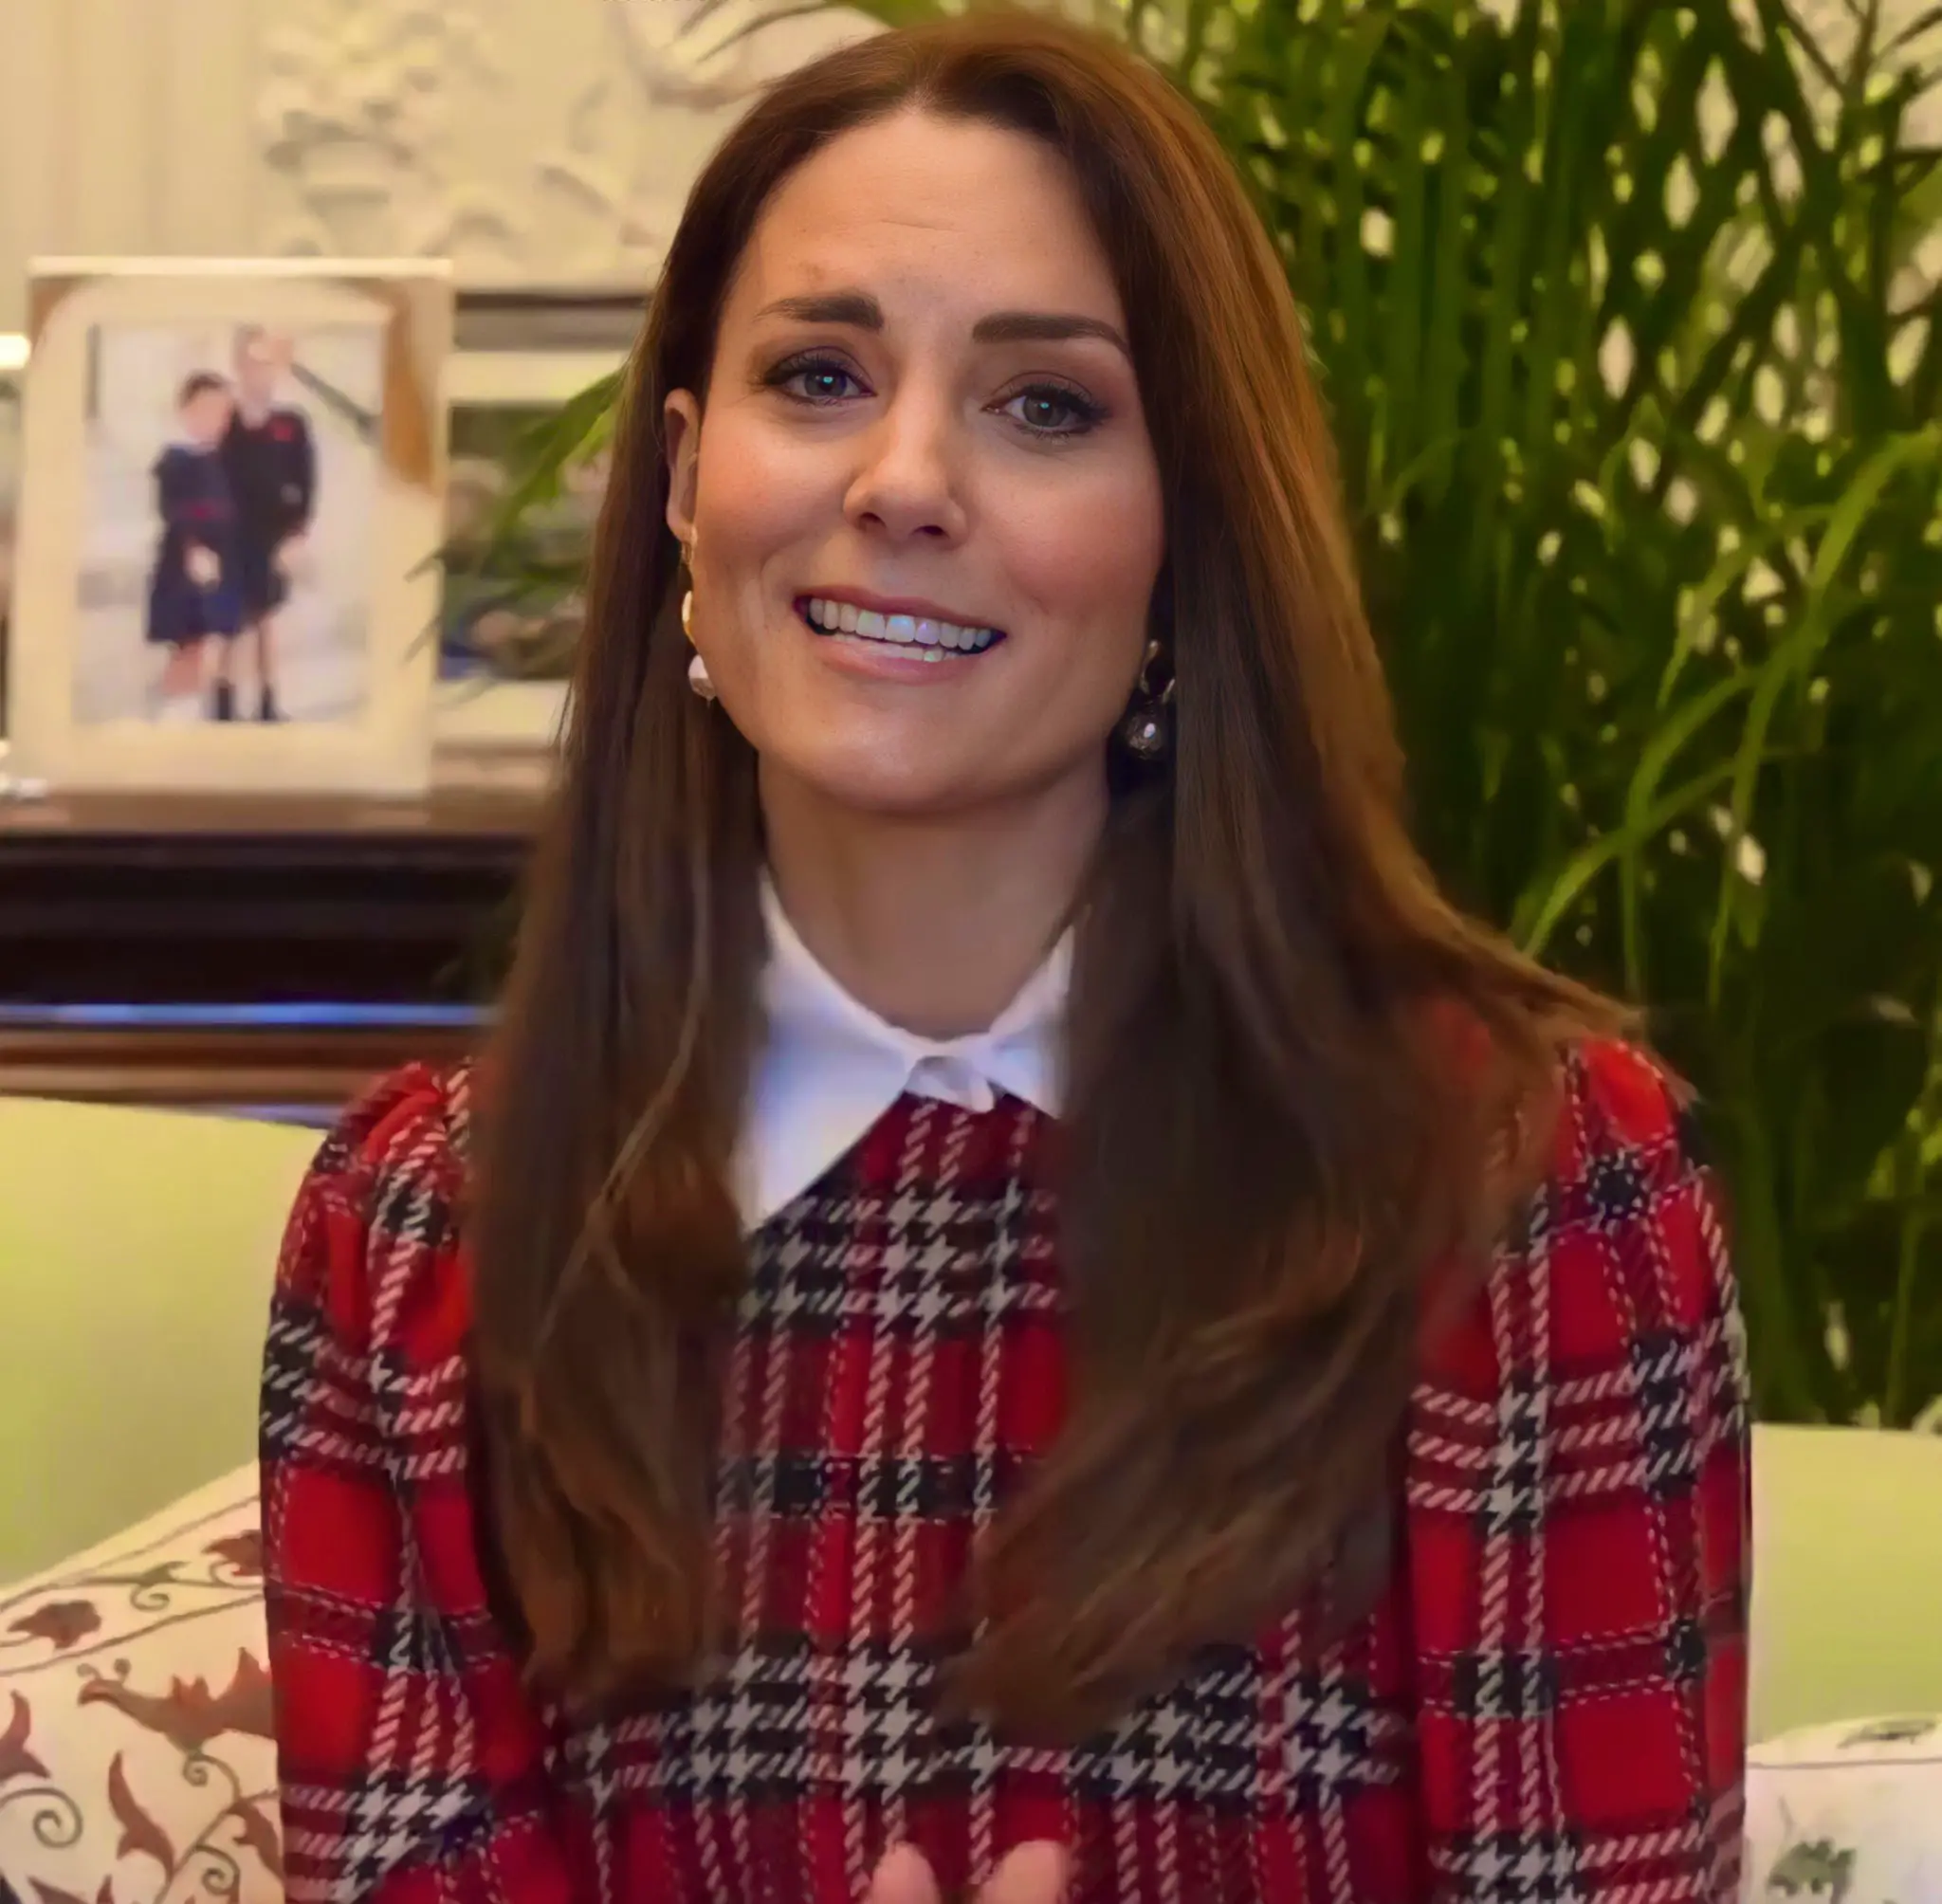 The Duchess of Cambridge thanked the NHS worker on Burns Night